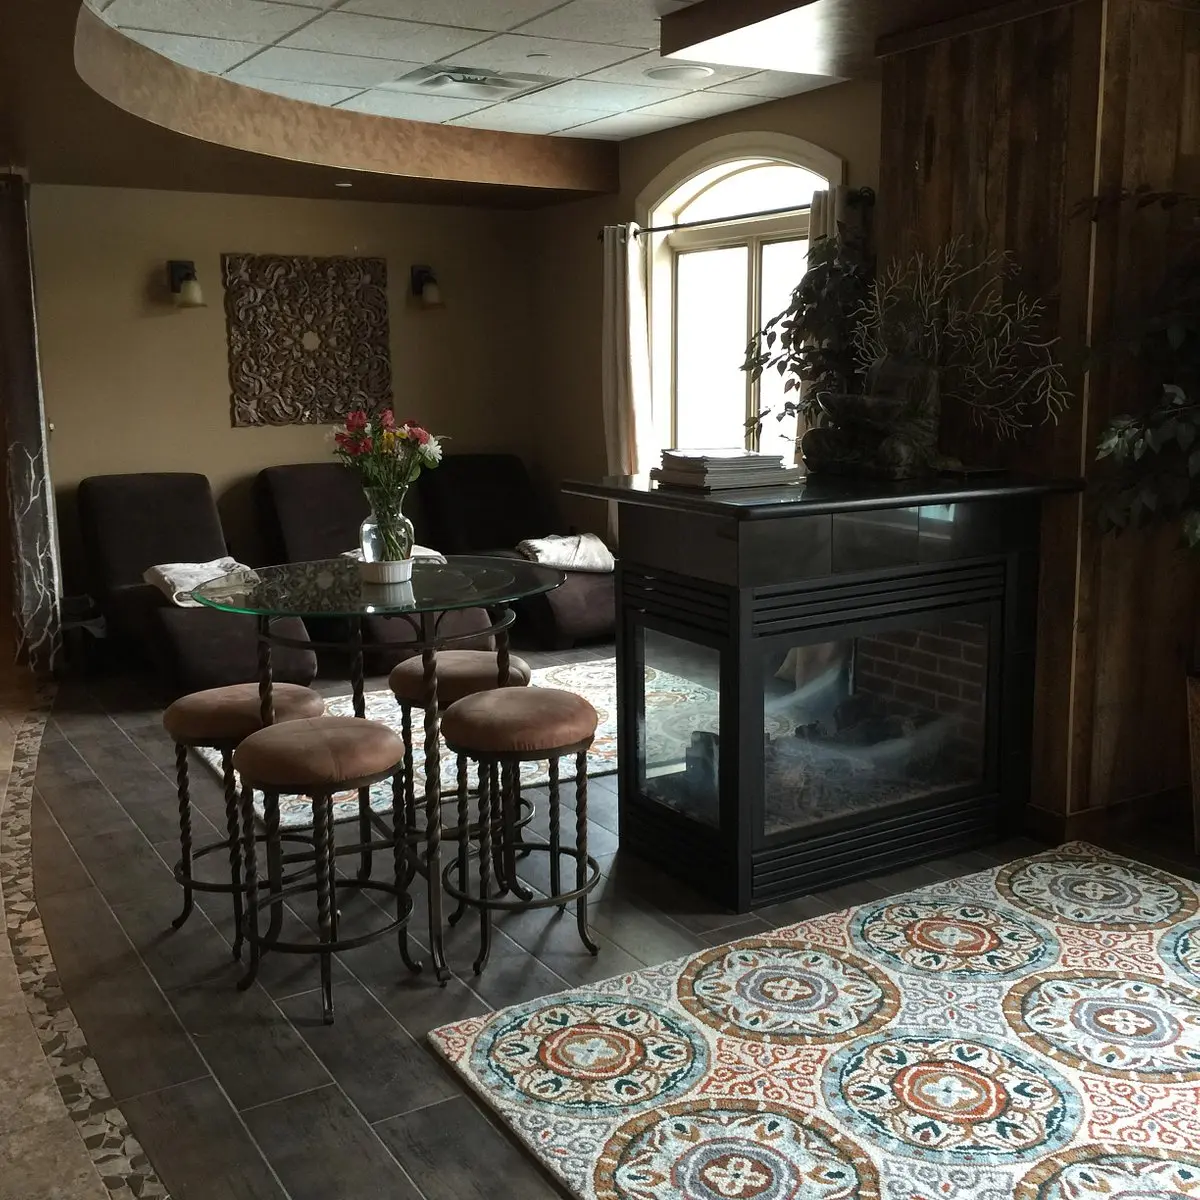 The Ellicottville Oasis Spa